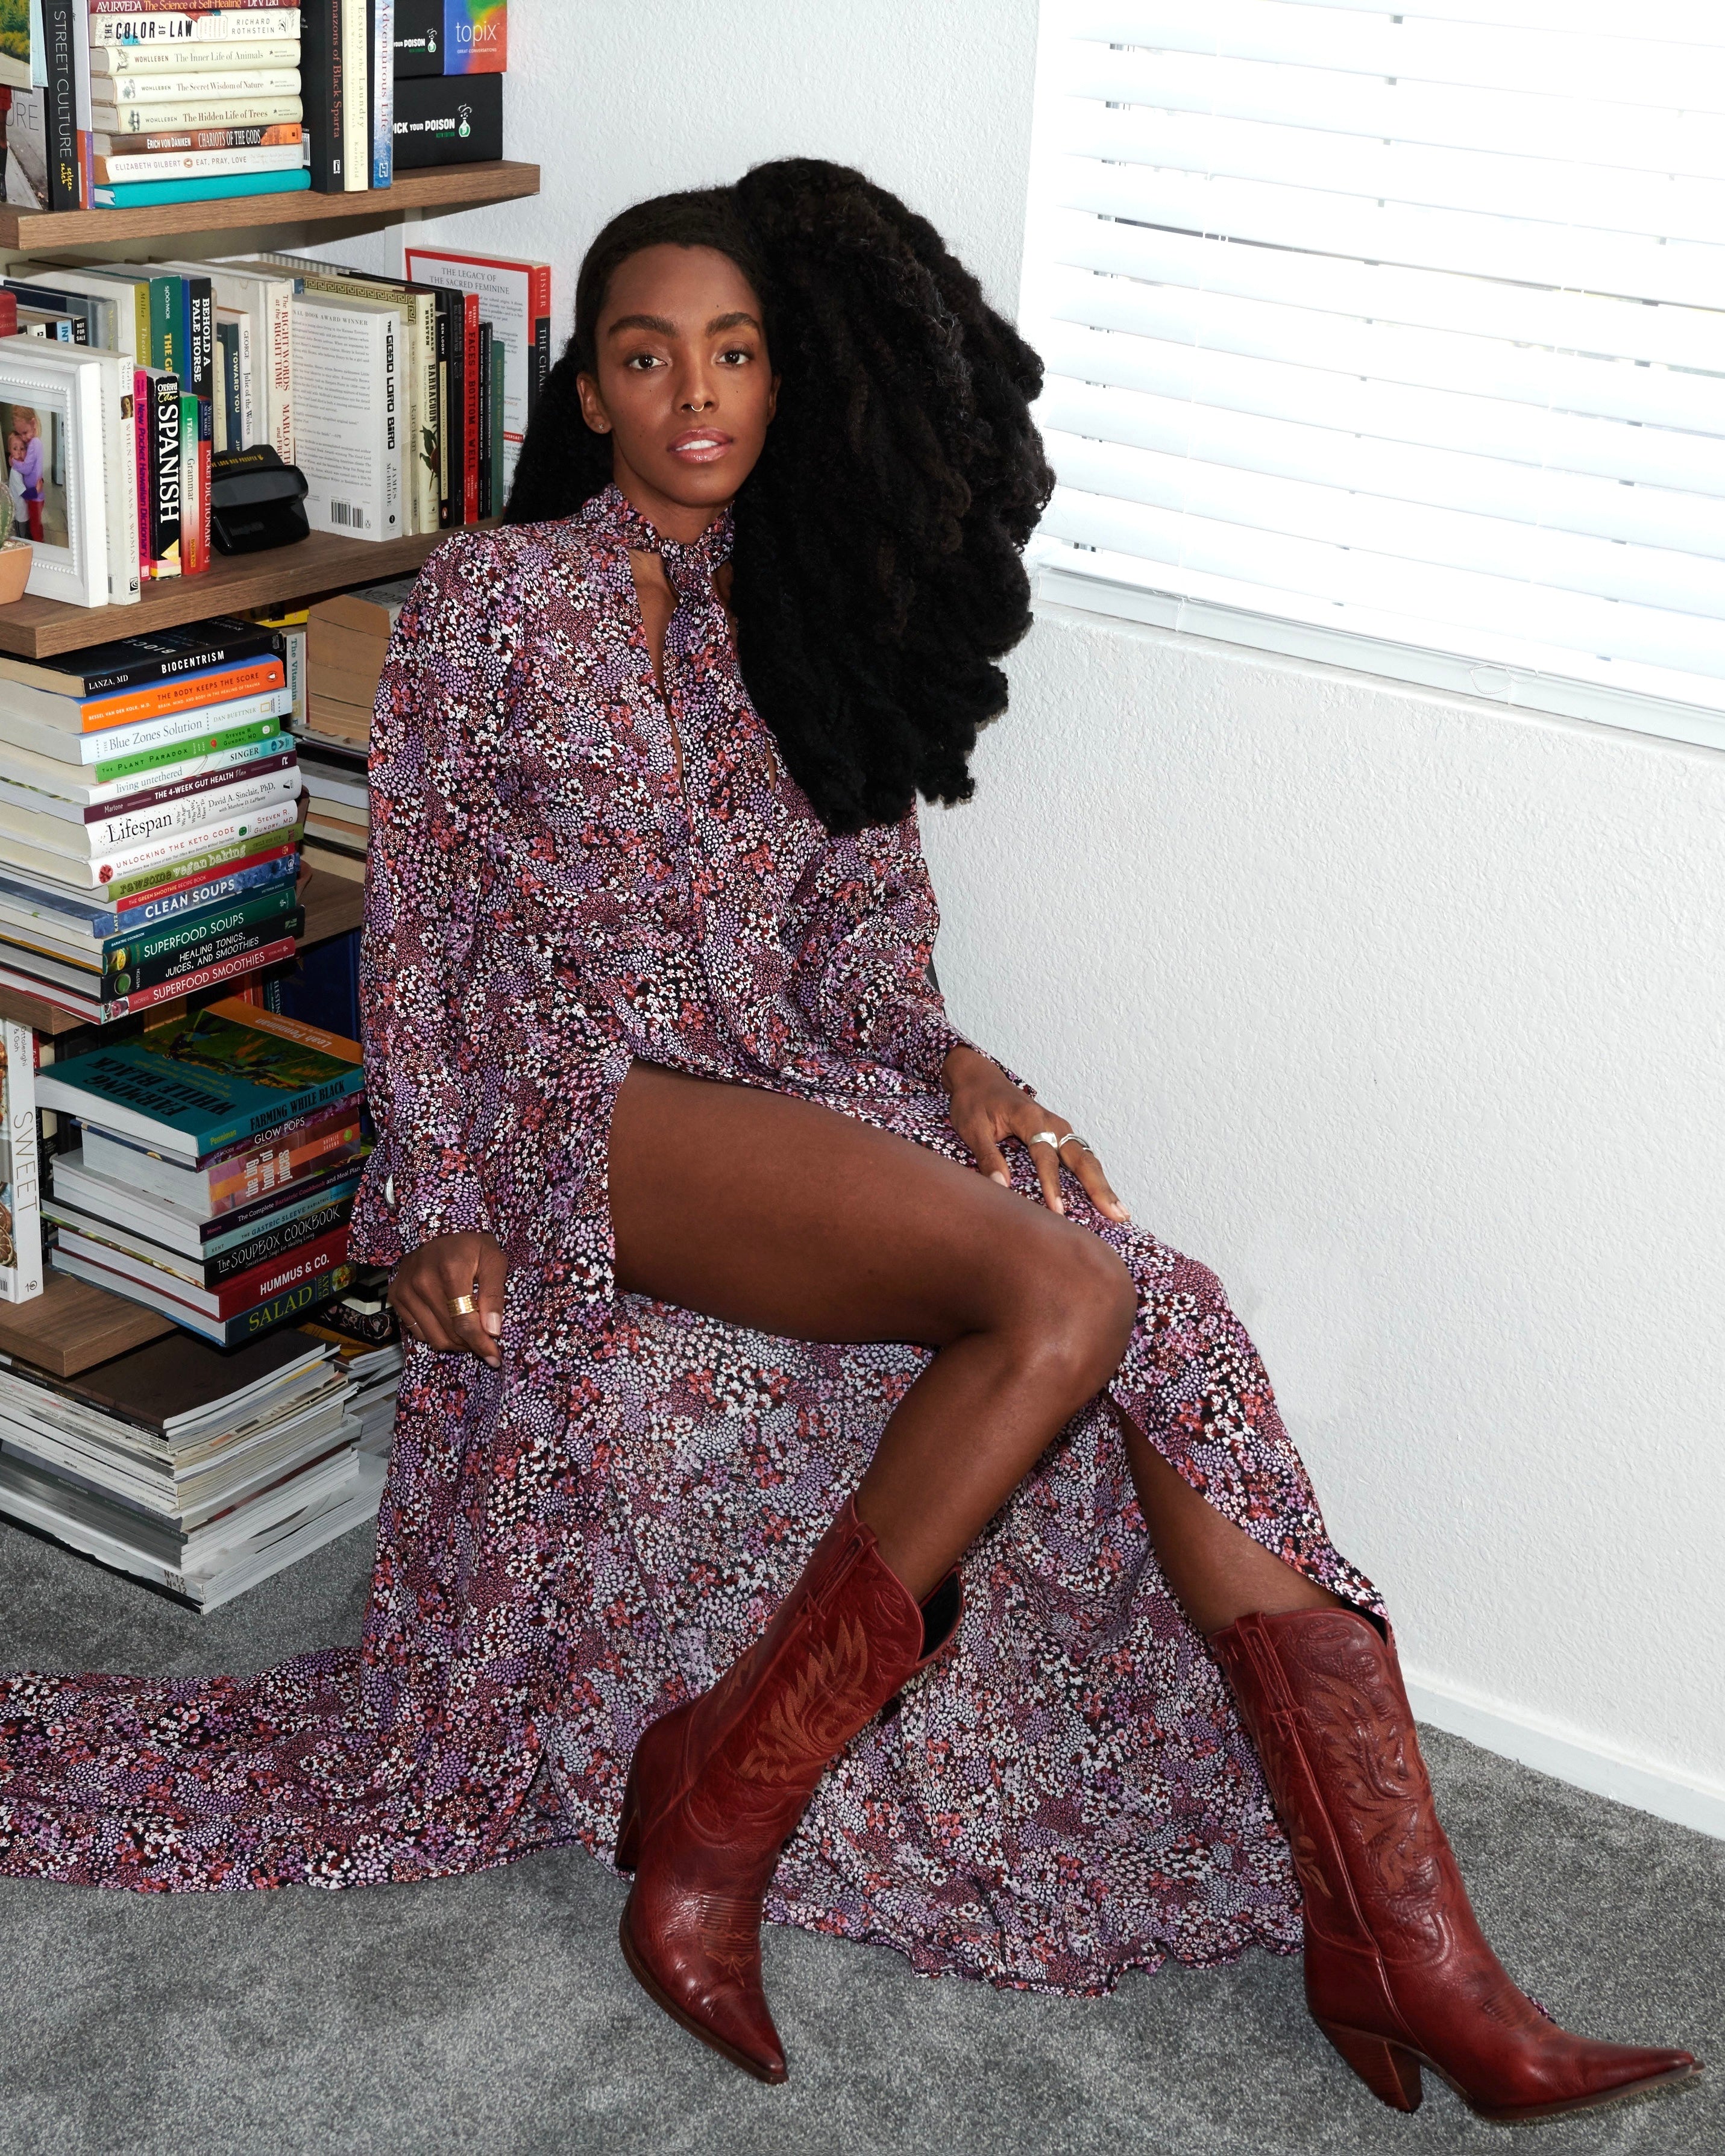 Cipriana Quann is wearing The Christiana Dress custom-made for her